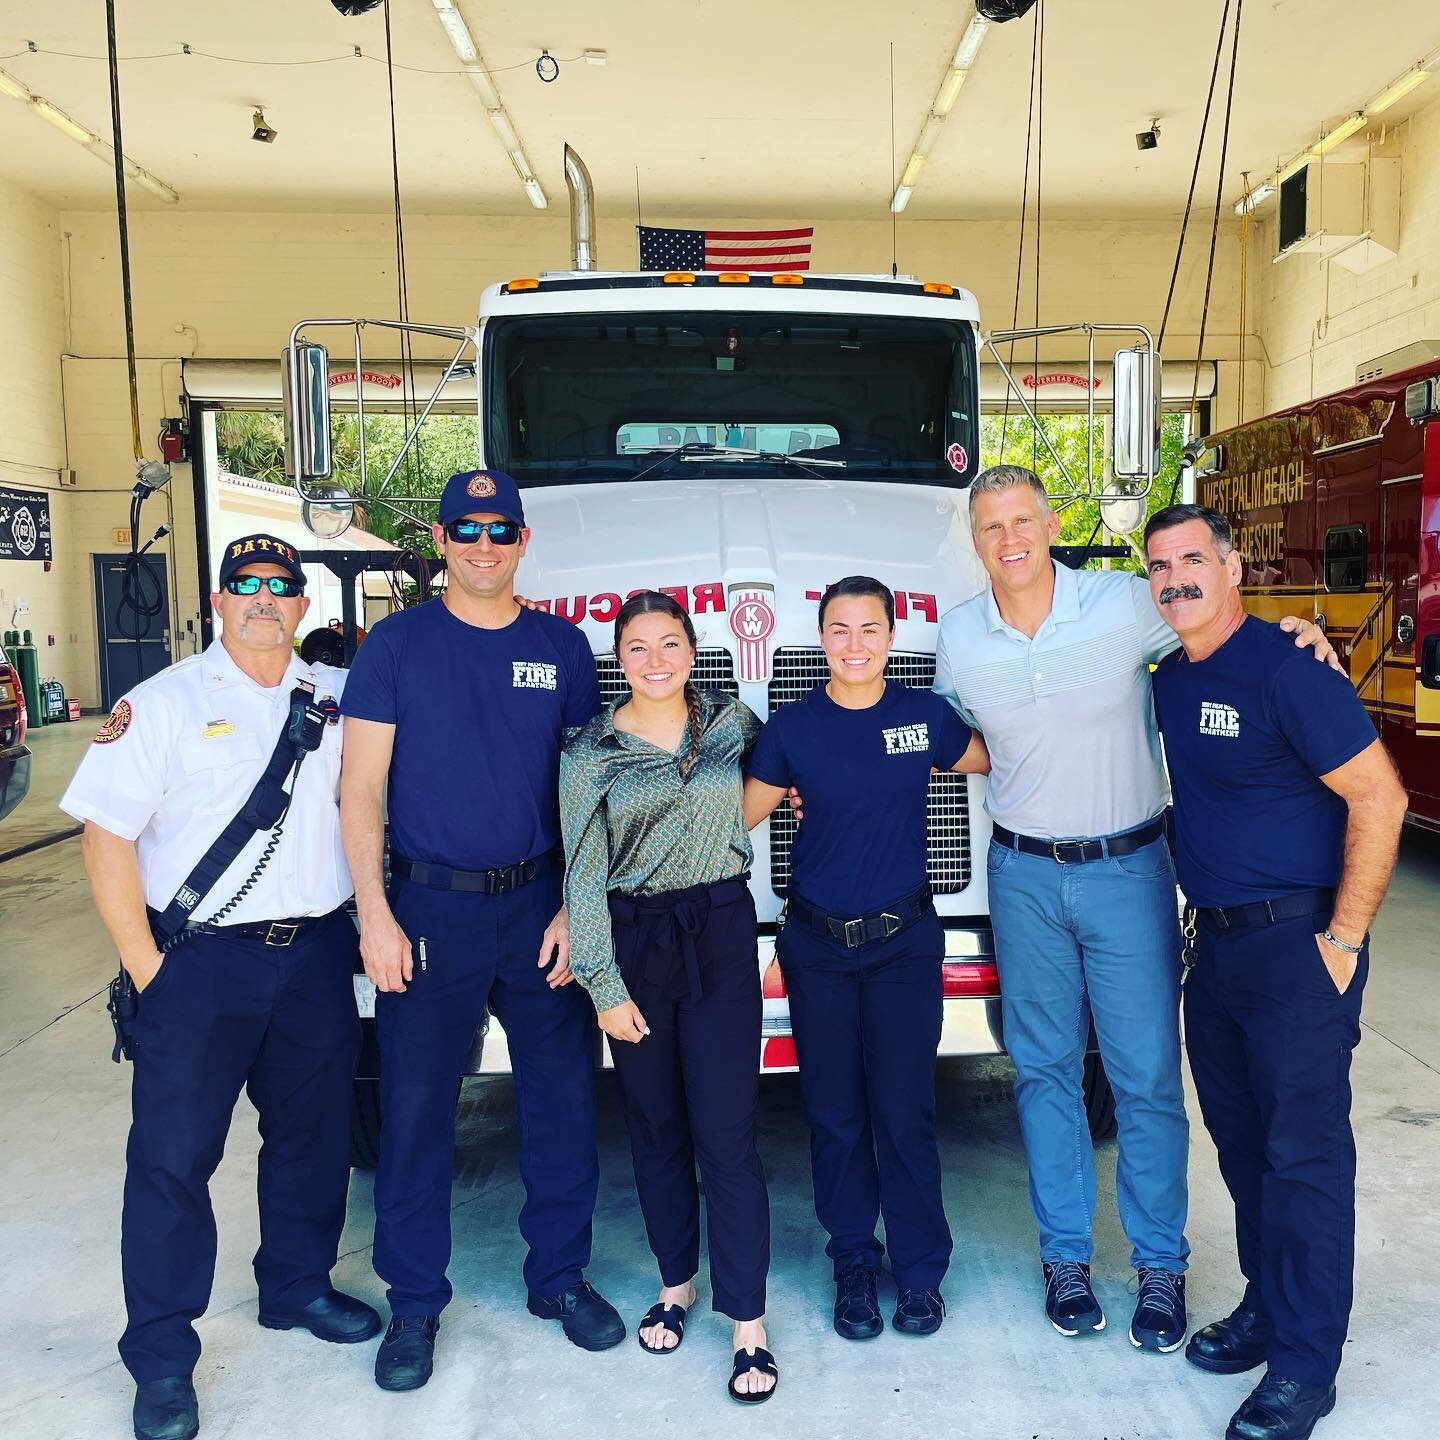 Had a great time with our newest sponsor @hiseekr down at station 2. Your contribution to this years climb will make a huge impact on the community. Thank you!